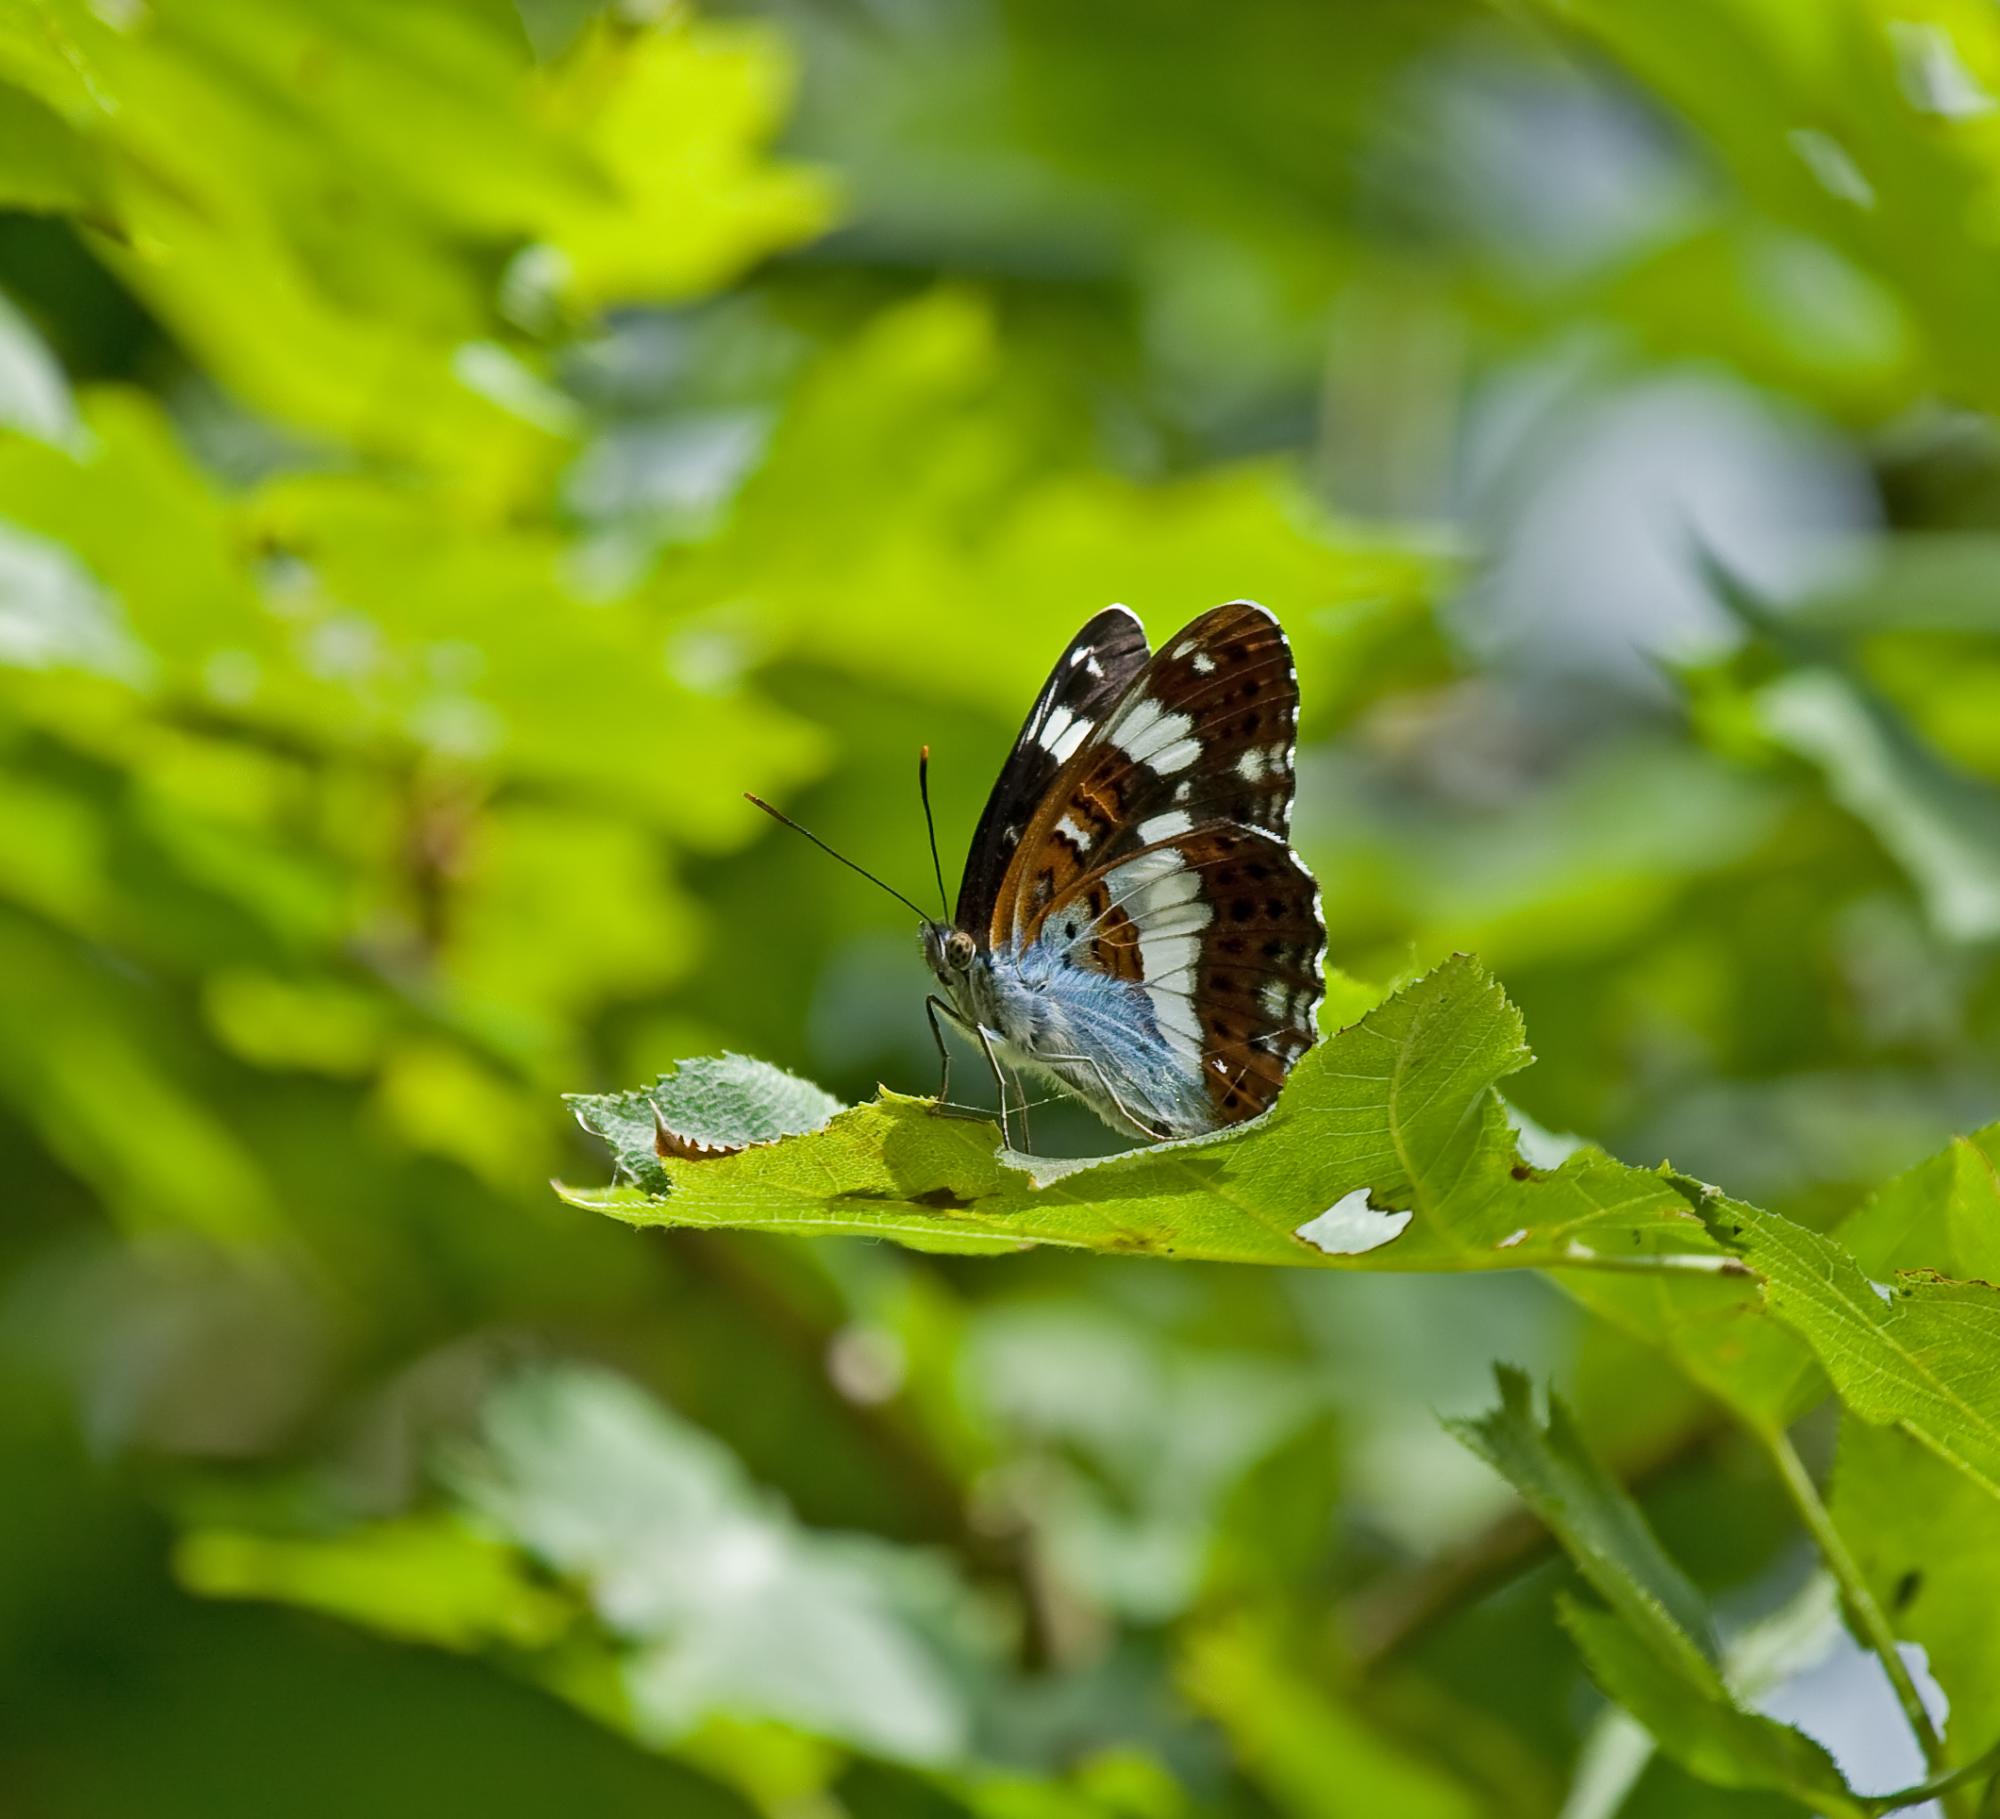 White admiral butterfly on a green leaf - shutterstock credit